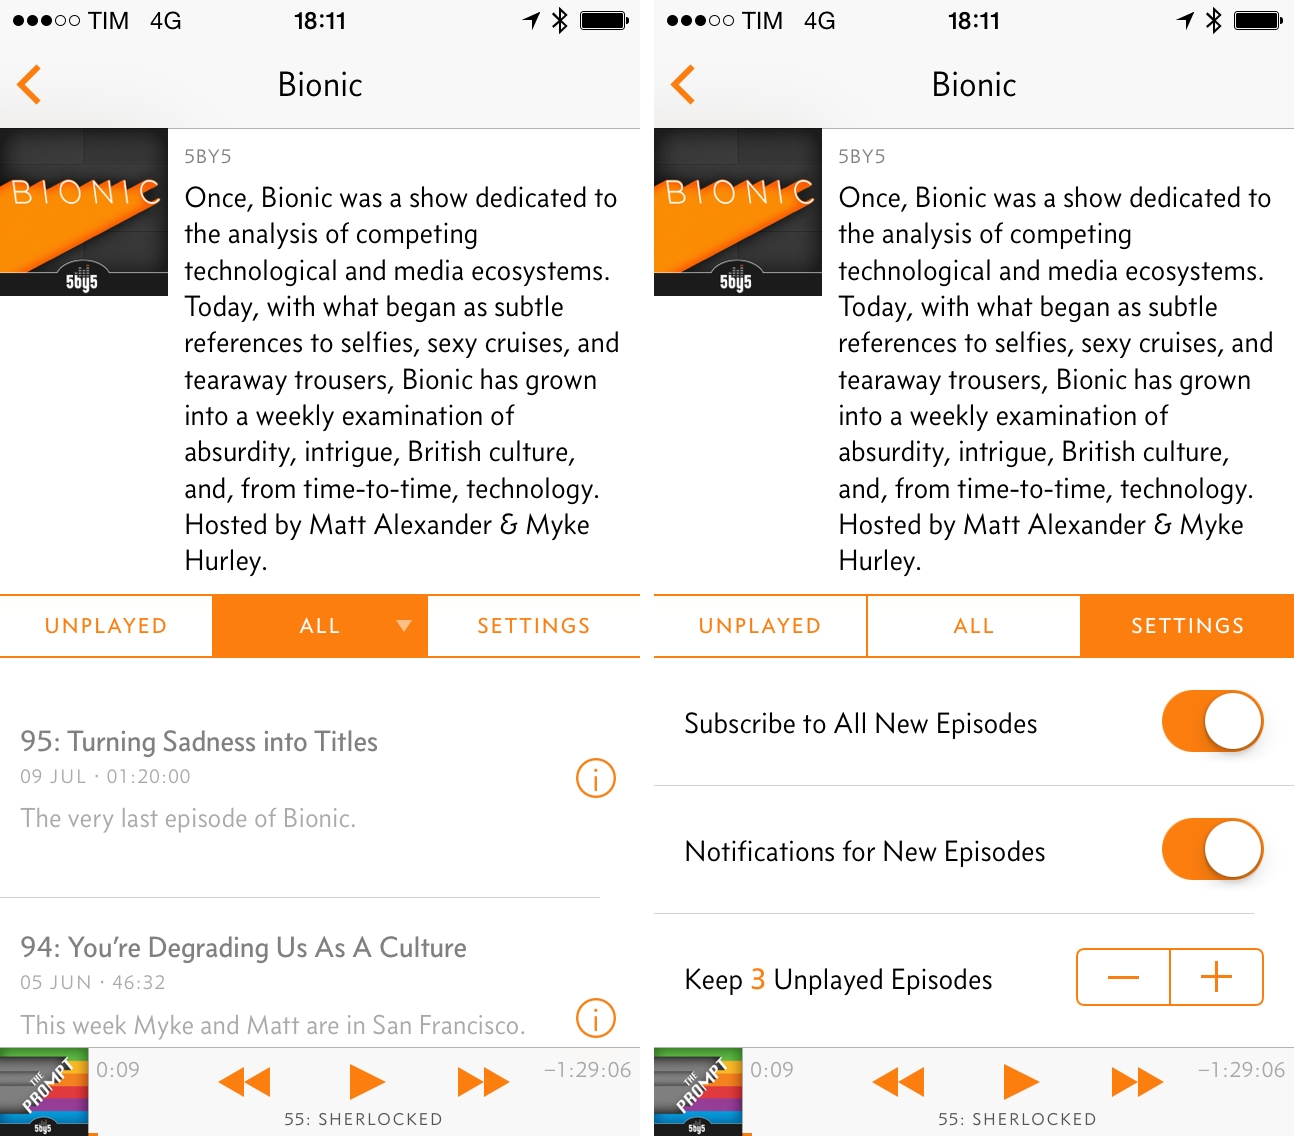 Episode navigation and podcast settings in Overcast.